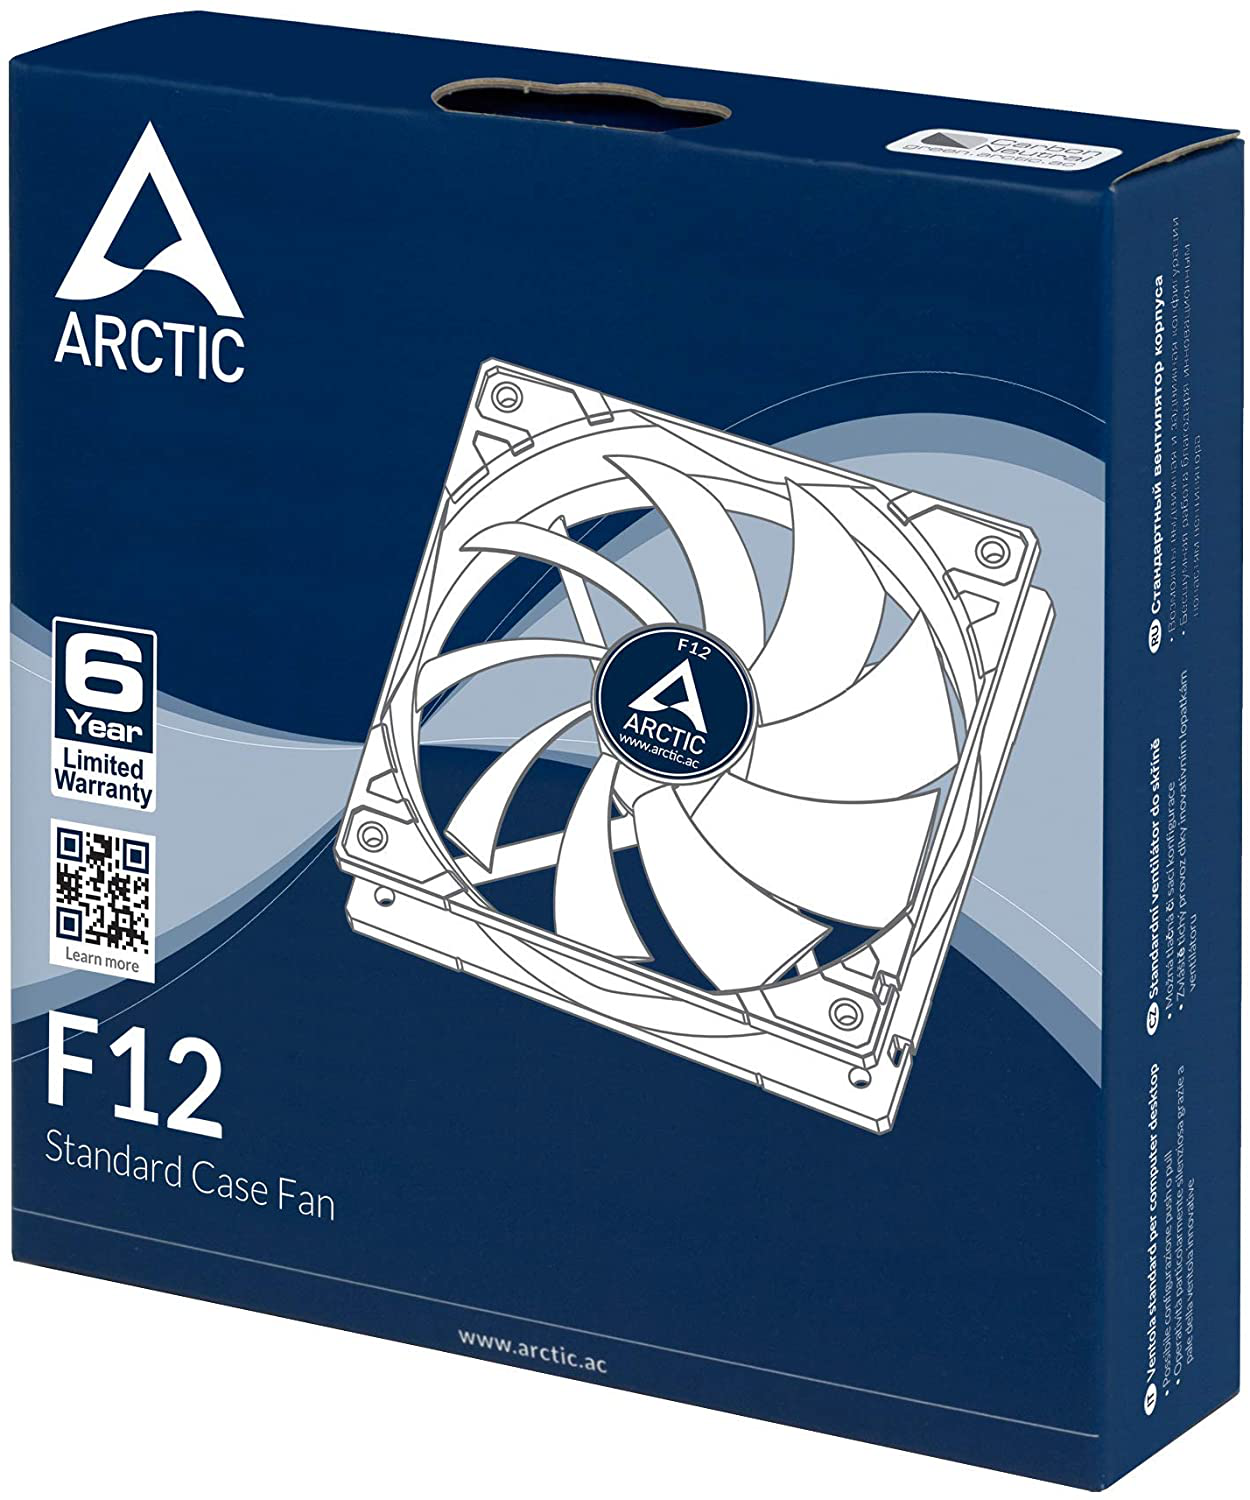 ARCTIC F12 - 120 Mm Standard Case Fan, Very Quite Motor, Computer, Push- or Pull Configuration, Fan Speed: 1350 RPM - Black/White